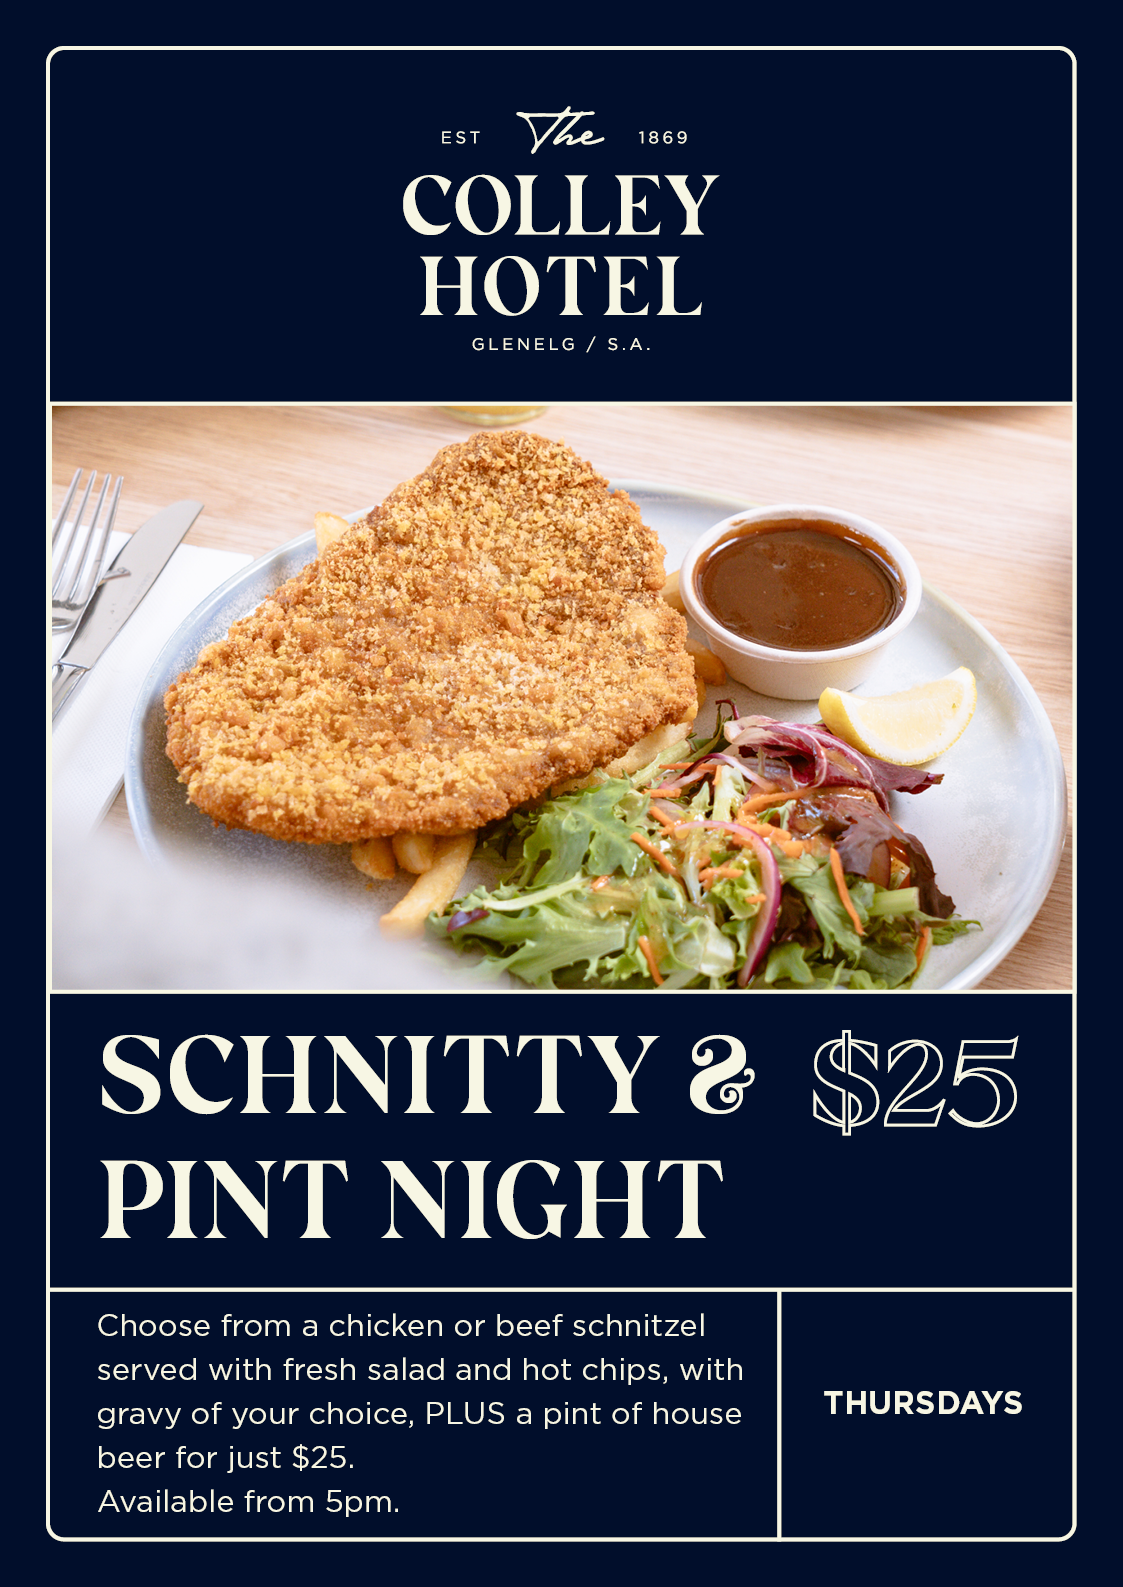 Schnitzel Night at The Colley Hotel